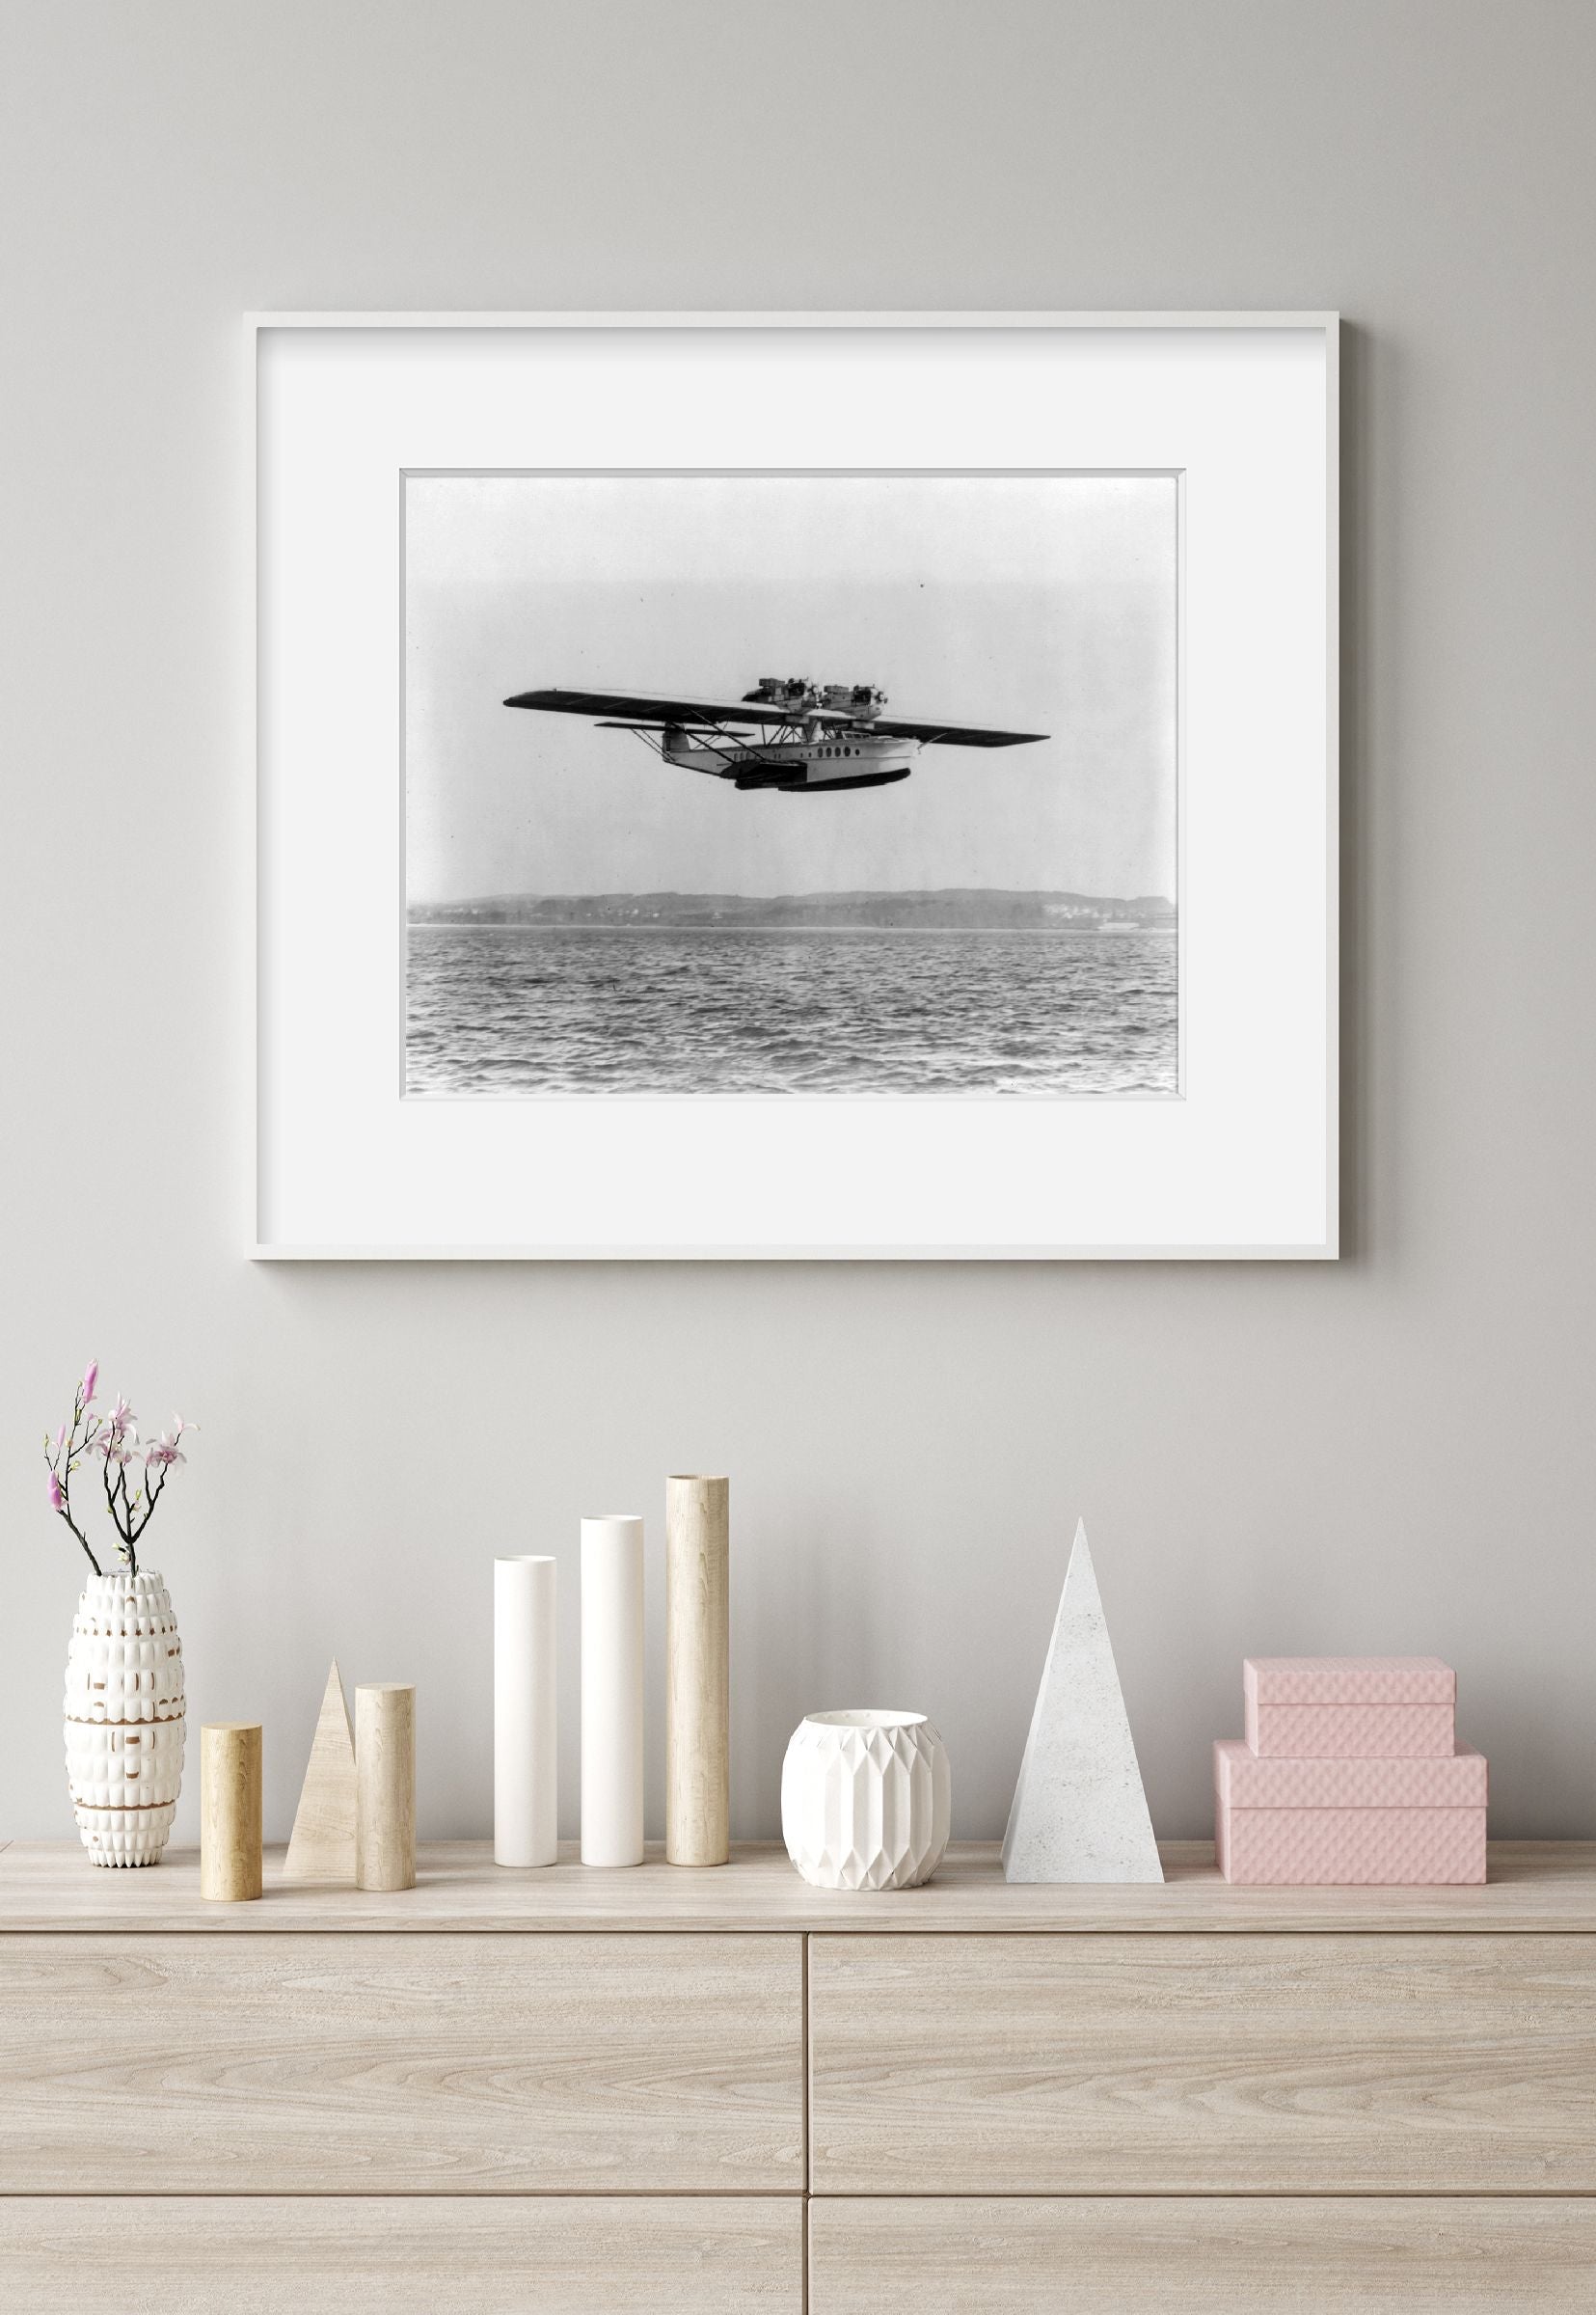 ca. 1928 photograph of Dornier seaplane flying low over water